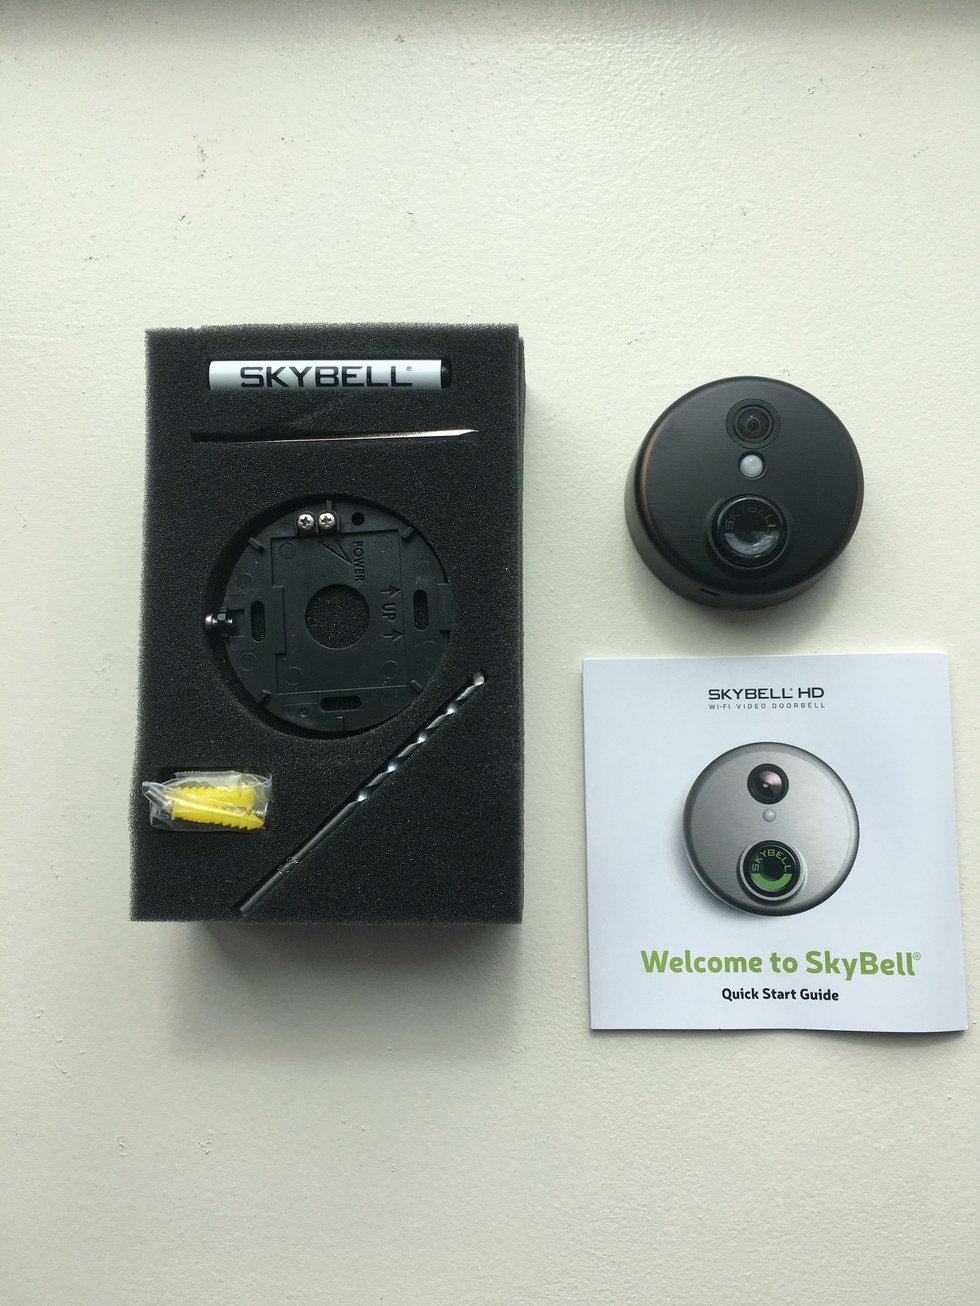 Review SkyBell HD video doorbell for your smart home